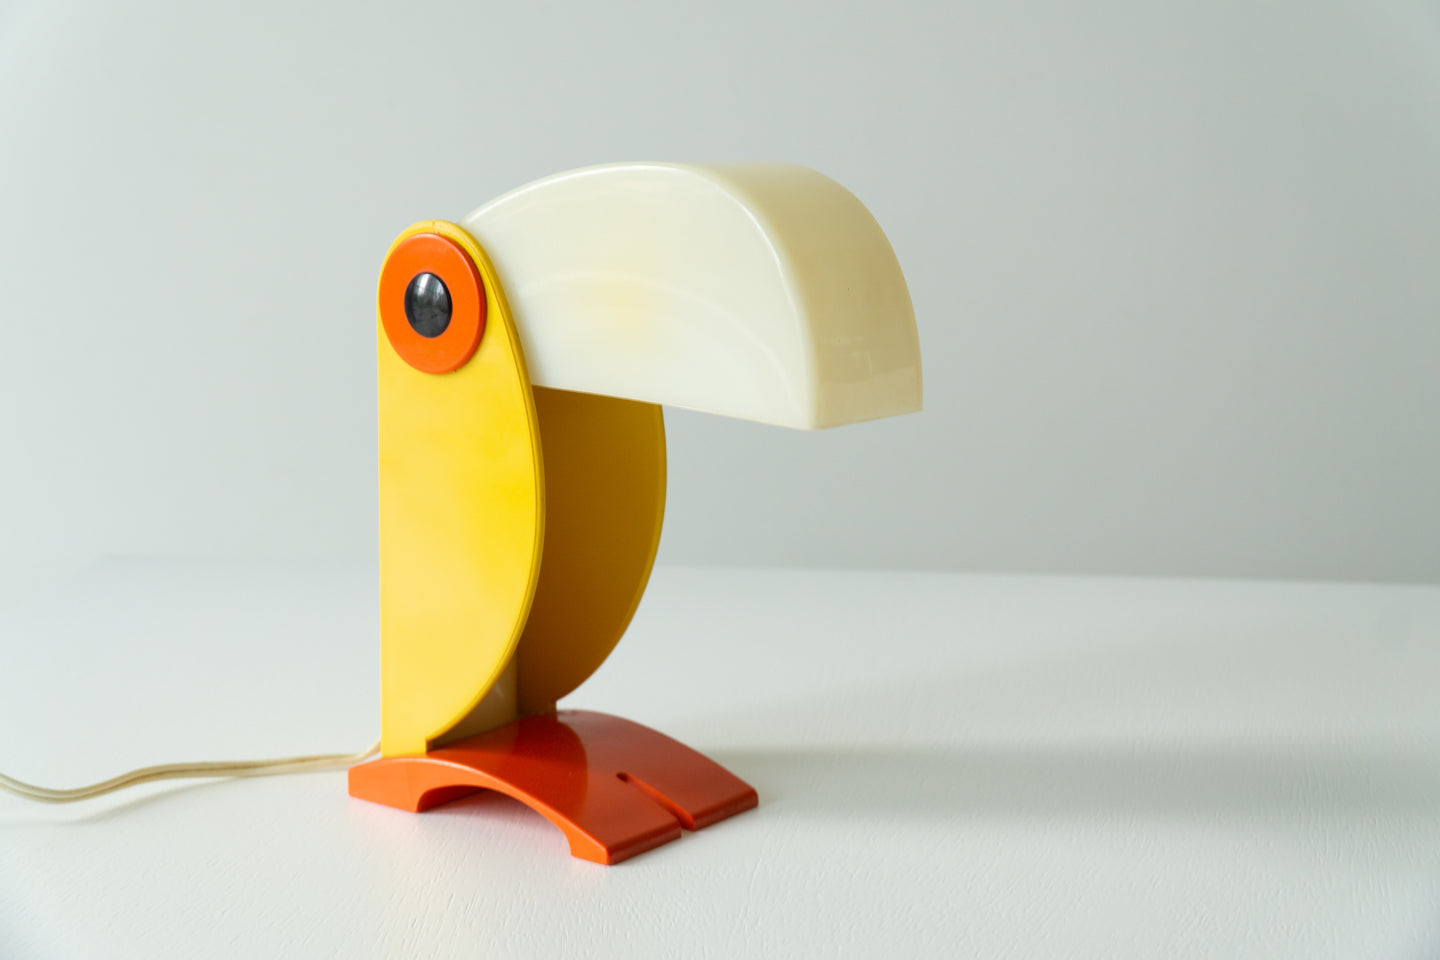 Toucan Lamp by Old Timer Ferrari, Italy